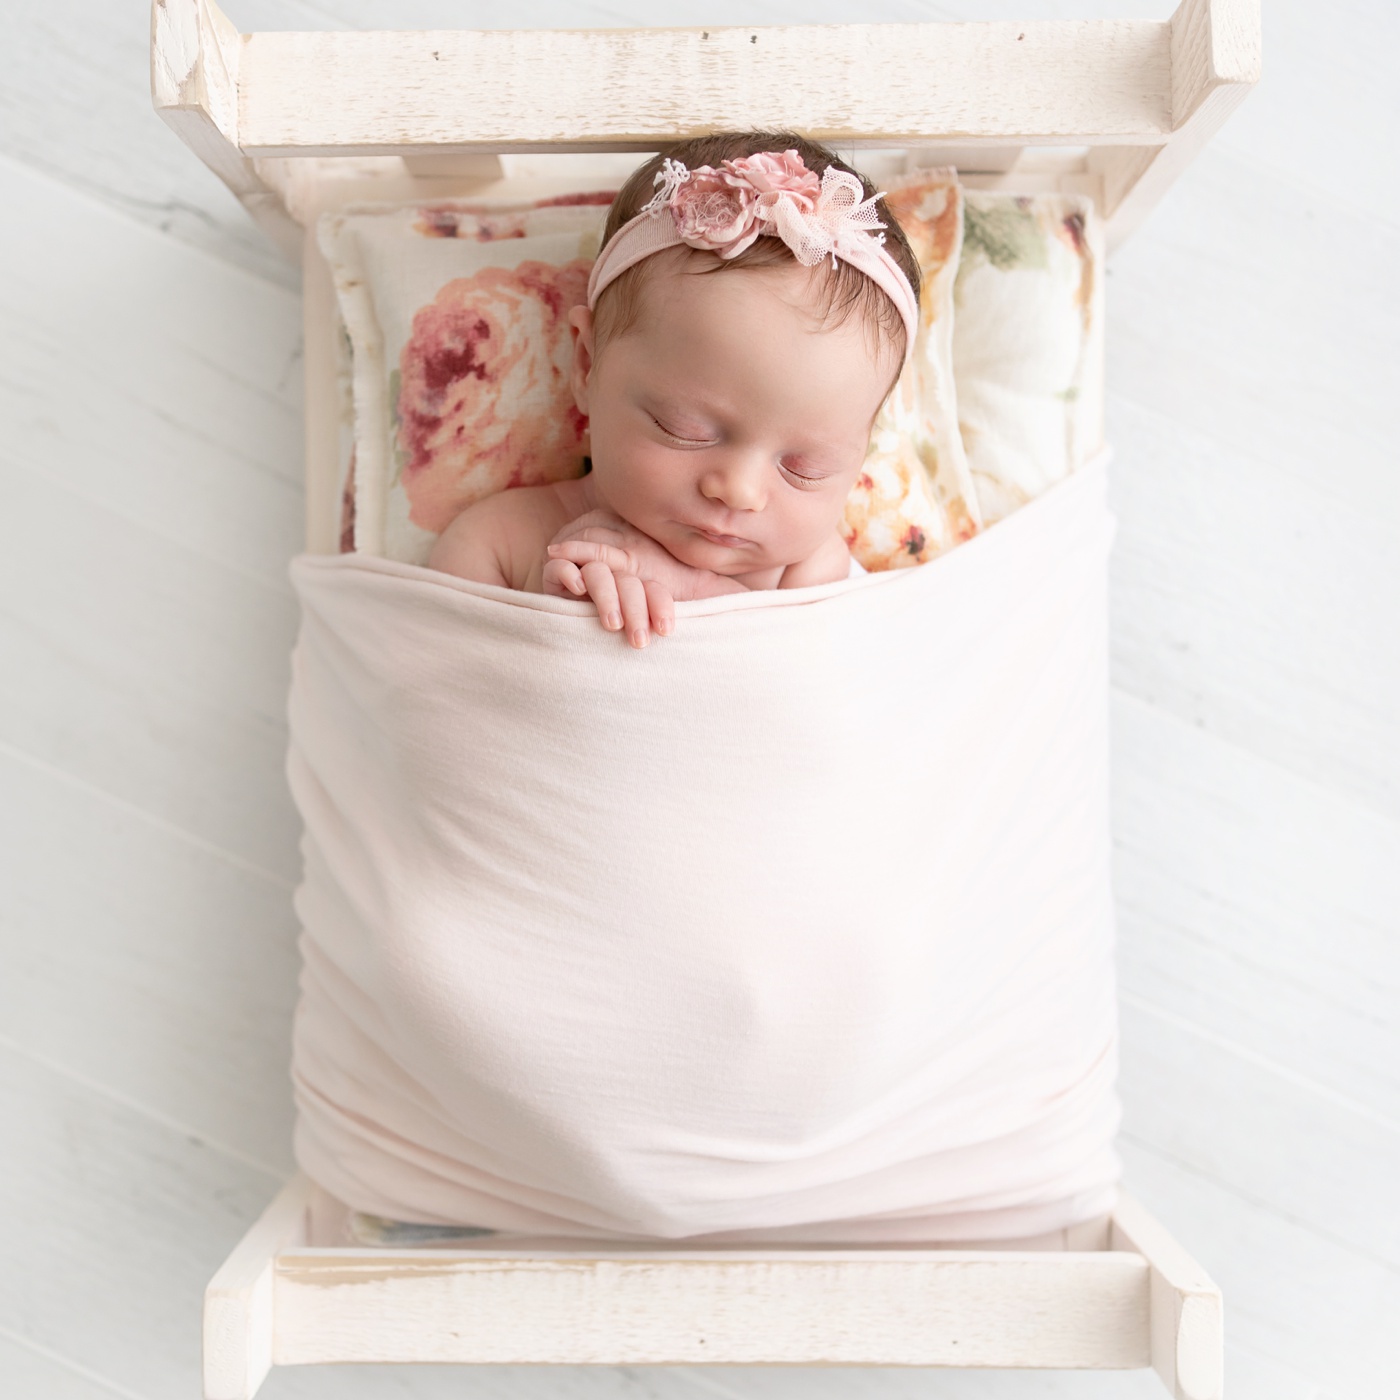  newborn baby on a pink bed with a floral pillow